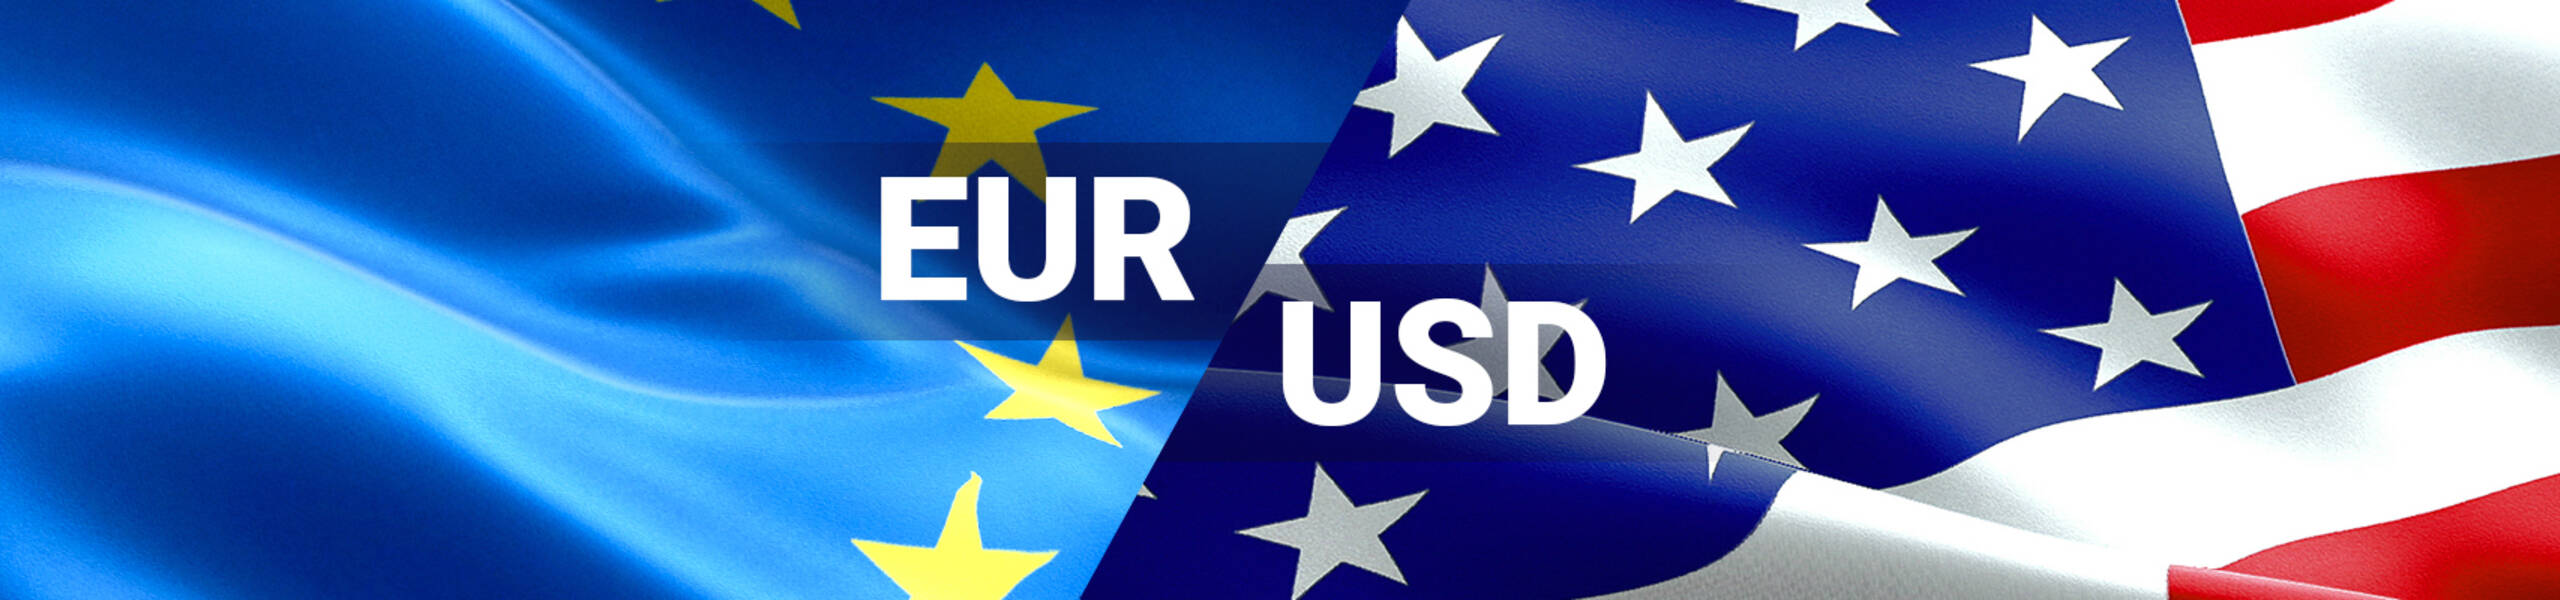 EUR/USD: euro ready to continue uptrend